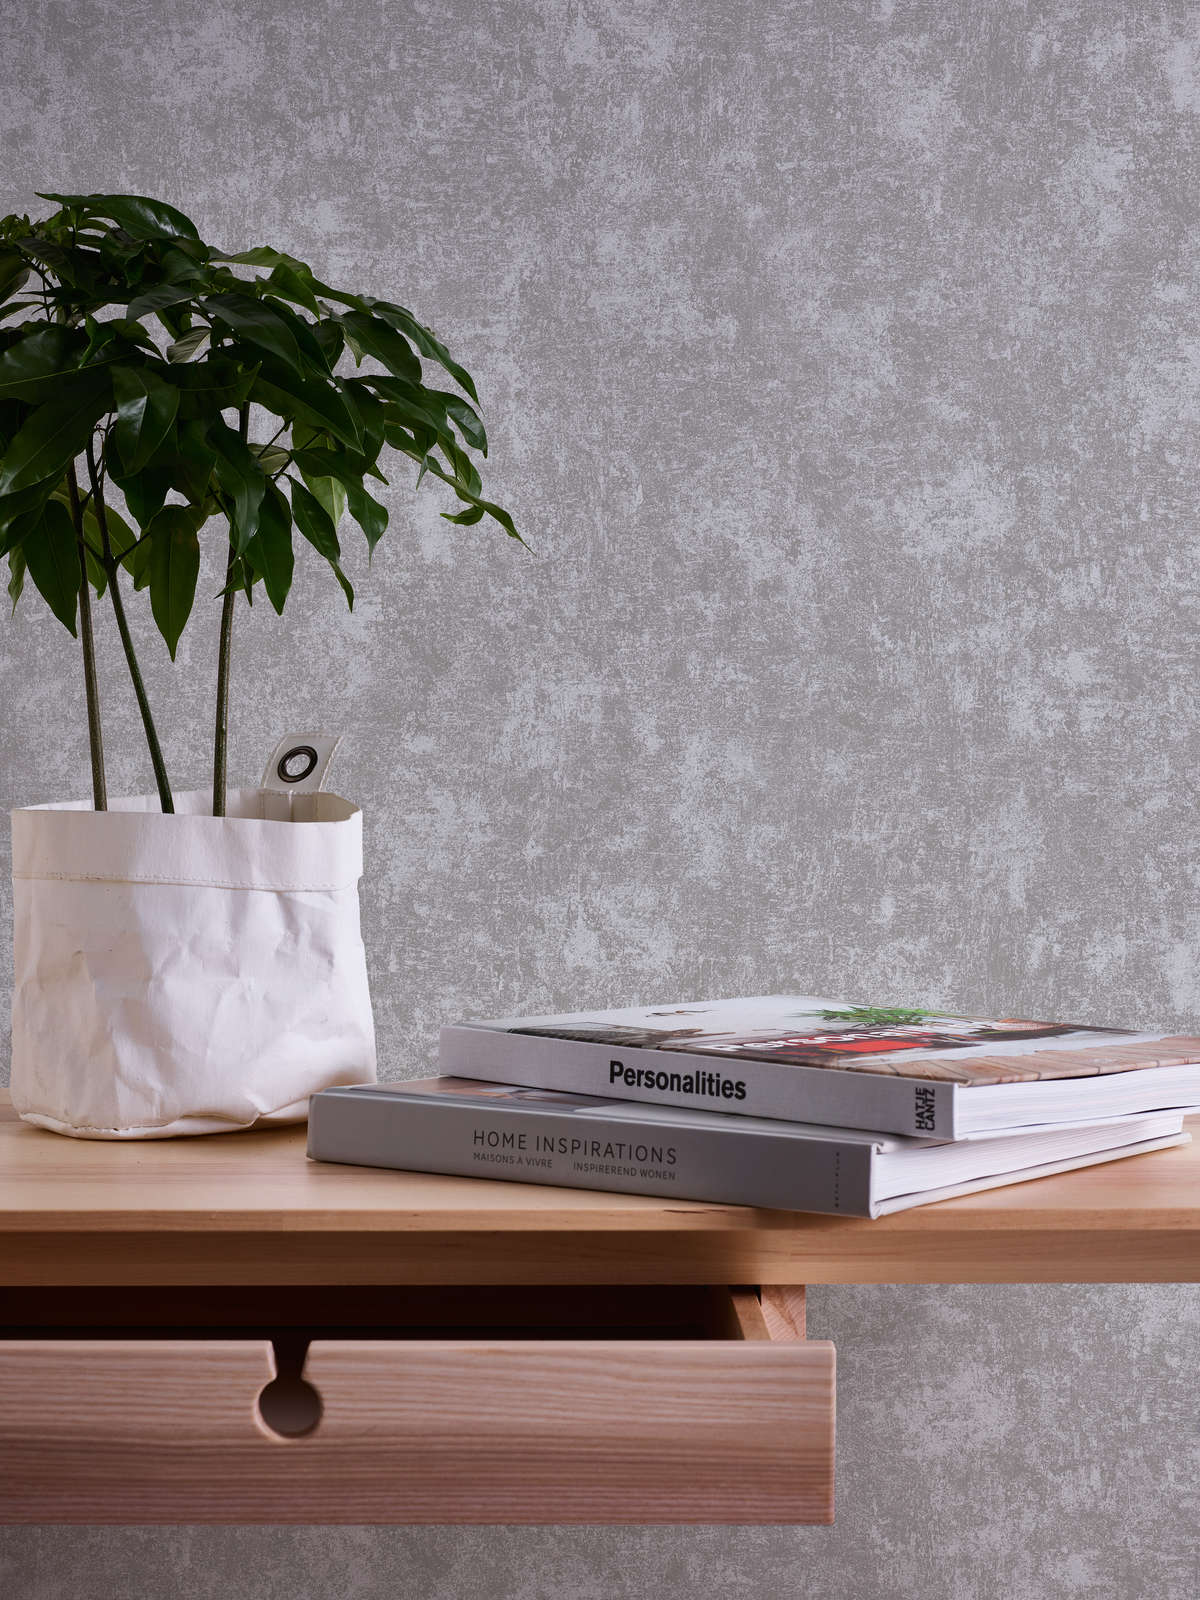             Wallpaper with metallic and gloss effect smooth - silver, grey, metallic
        